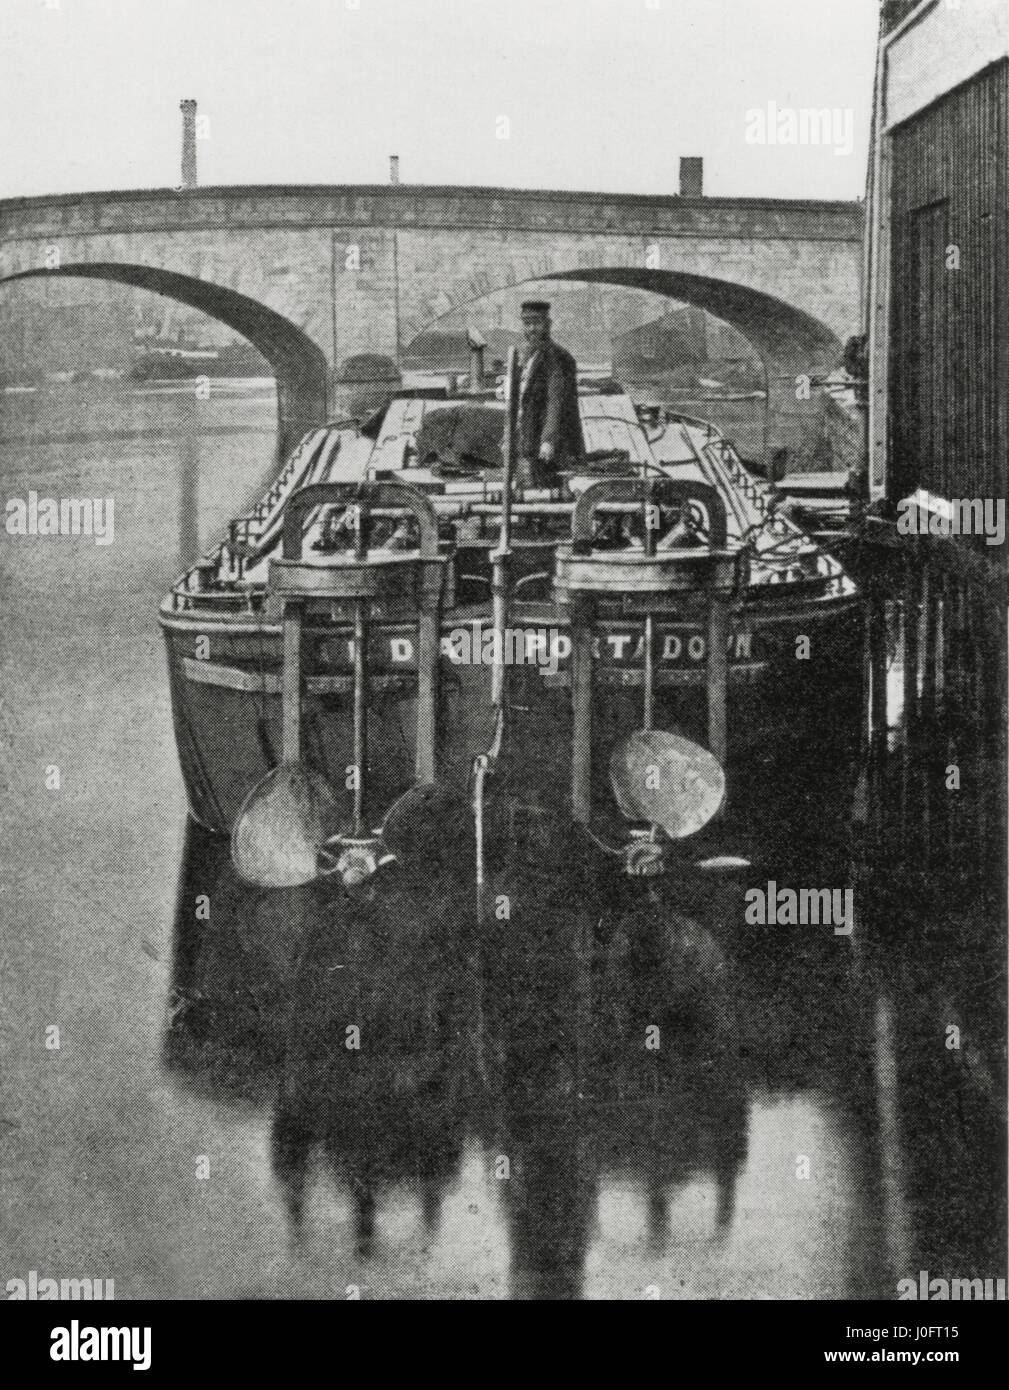 Stern view of Hilda, showing canal boat propellers Stock Photo